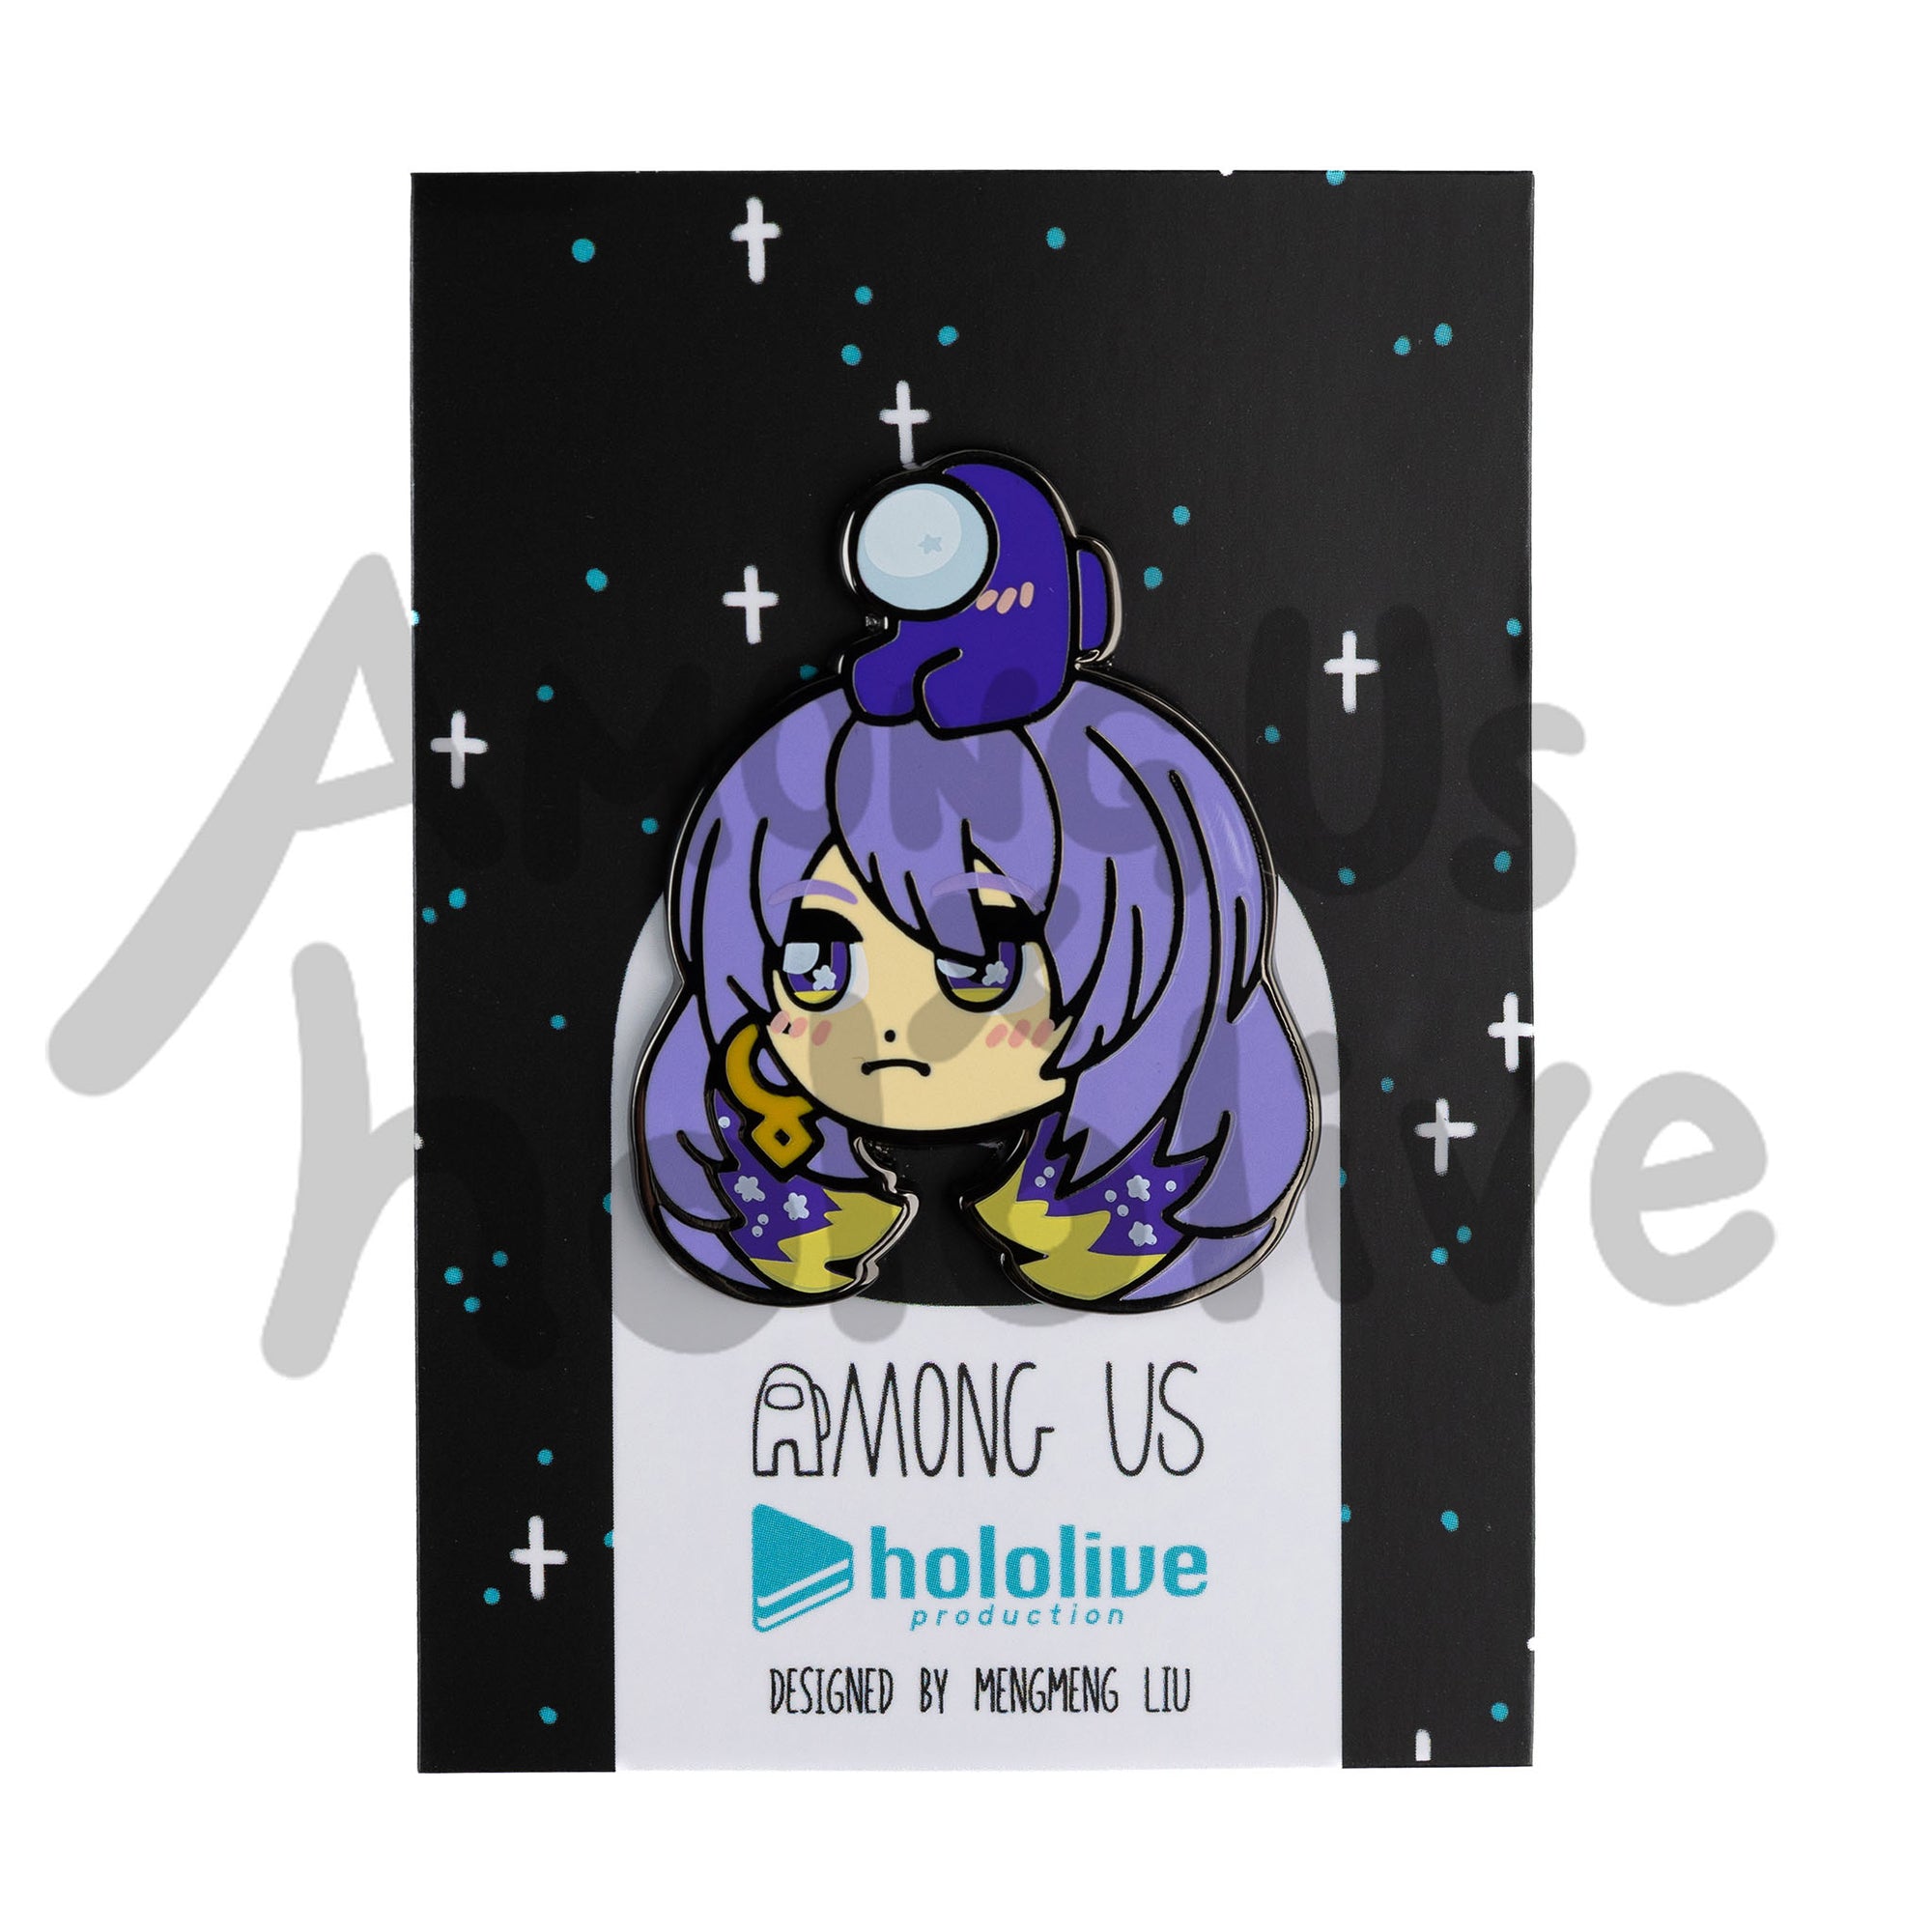 Enamel Pin of Moona Hoshinova's Face from Hololive. Marine has fair skin, purple sparkly eyes, and purple shaggy hair. There's a Purple Crewmate sitting atop her head. Both characters have pink blush marks on their face.